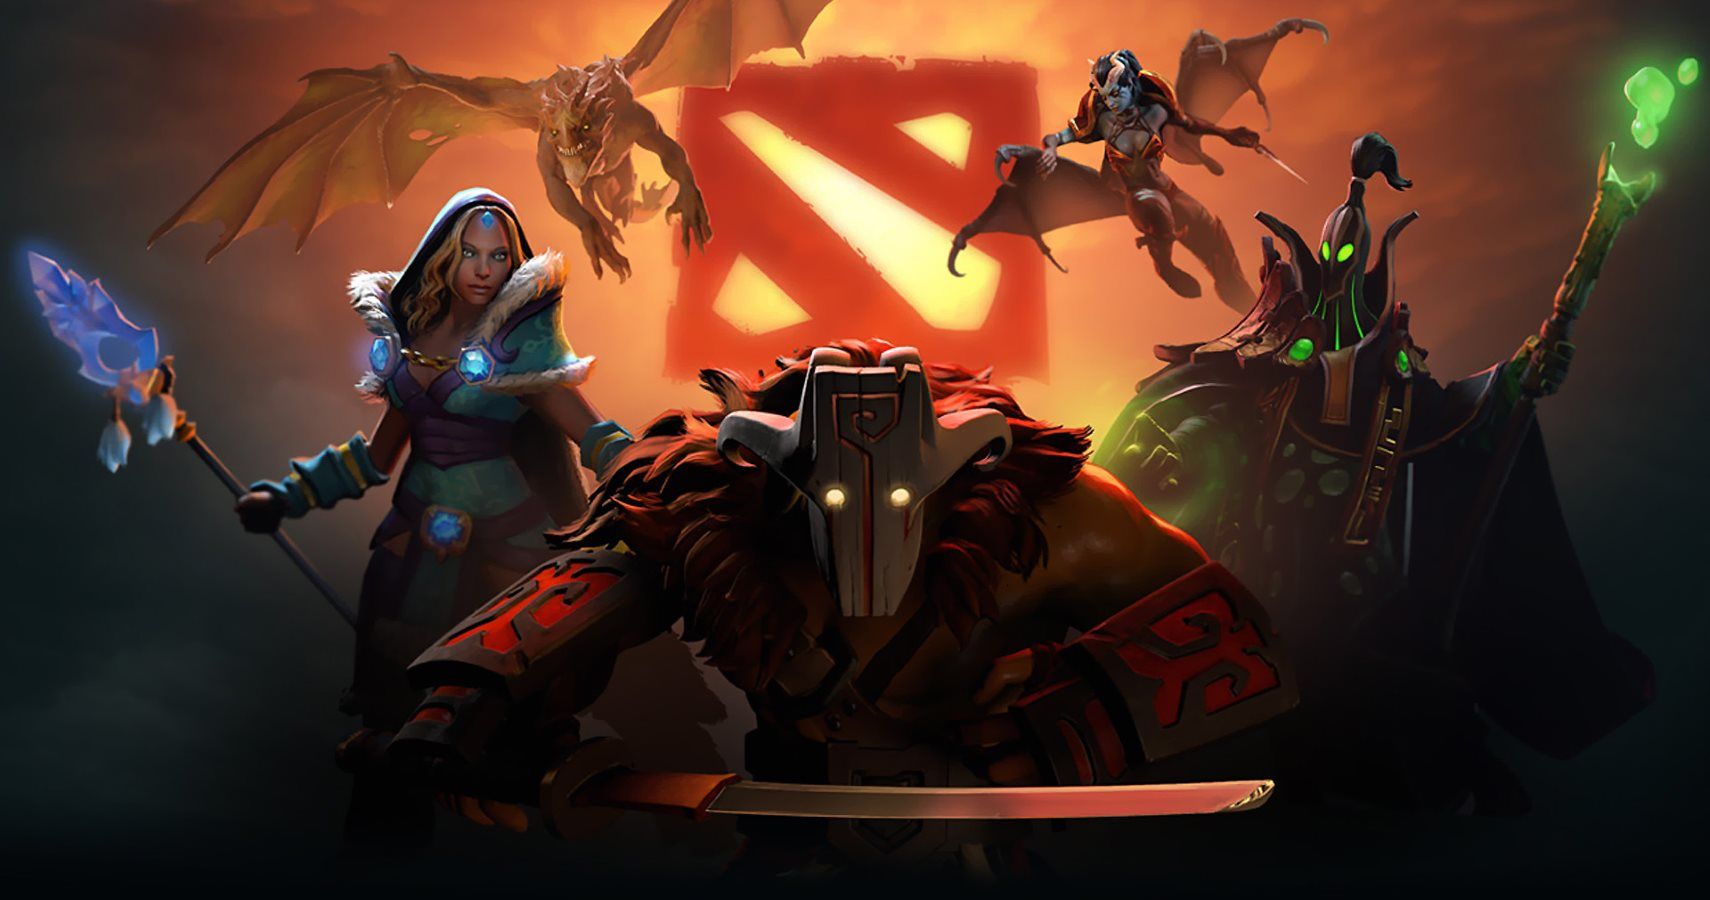 Dutch Dota 2 Players Can Now See The Contents Of Loot Boxes Before Buying - But This Won't Stop Gambling